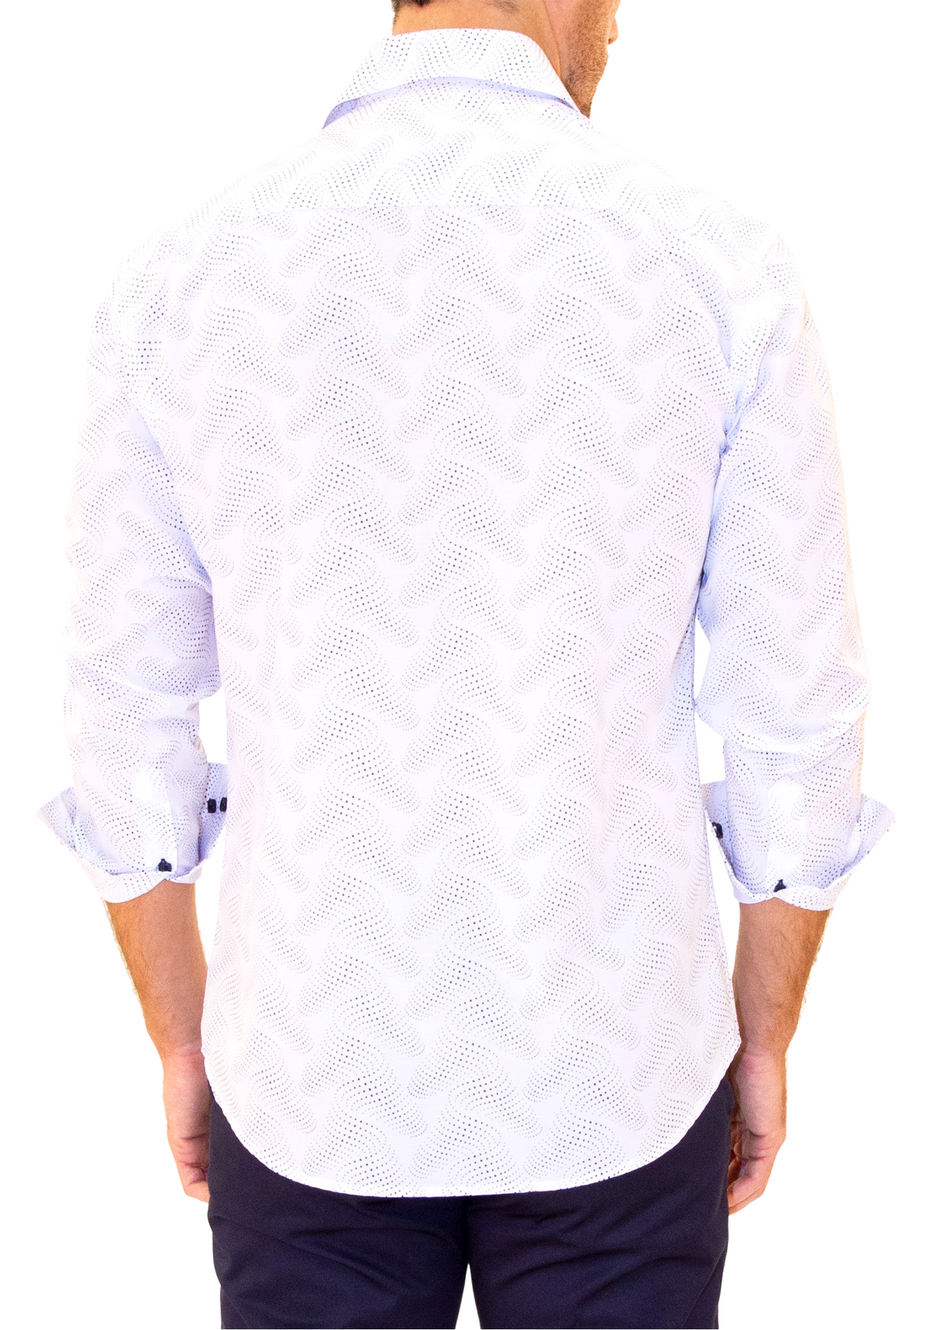 White Abstract Halftone Effect Dotted Wave Print Long Sleeve Dress Shirt